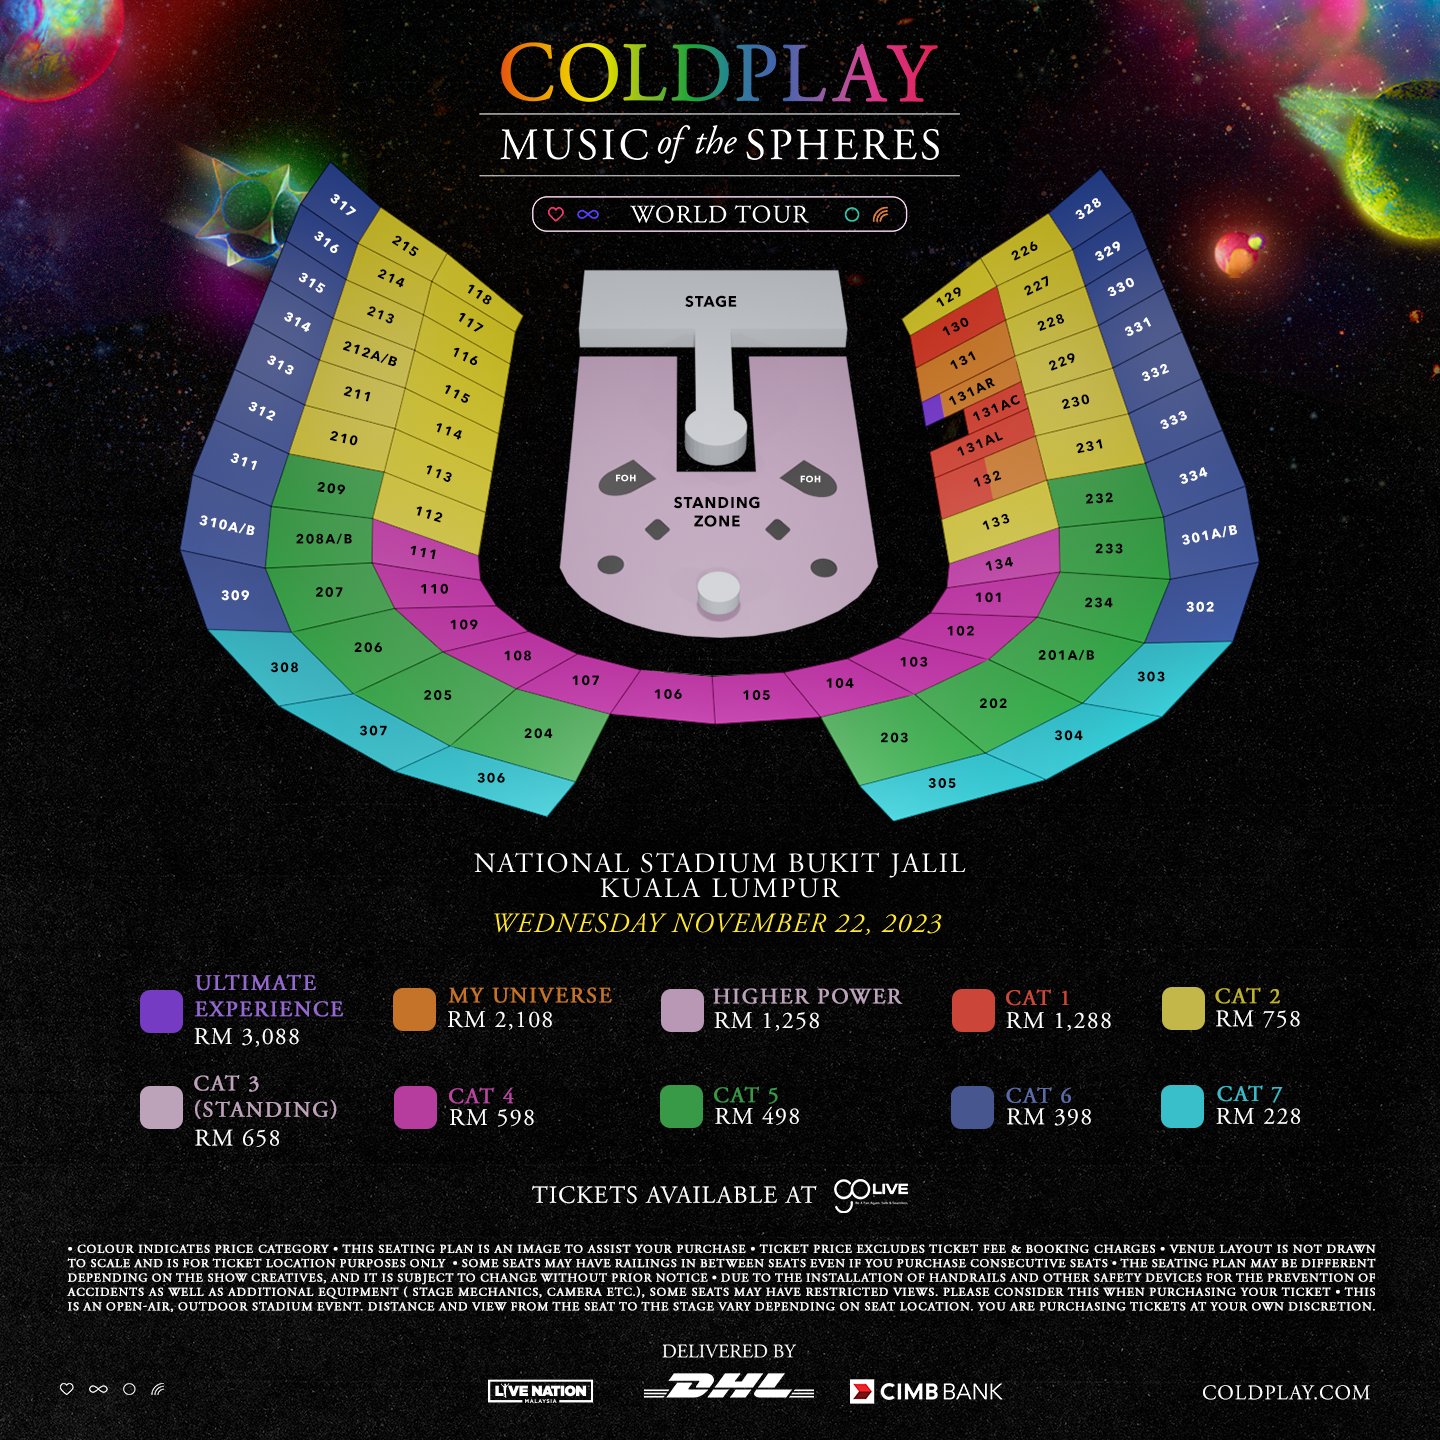 Coldplay concert in Malaysia - pricing